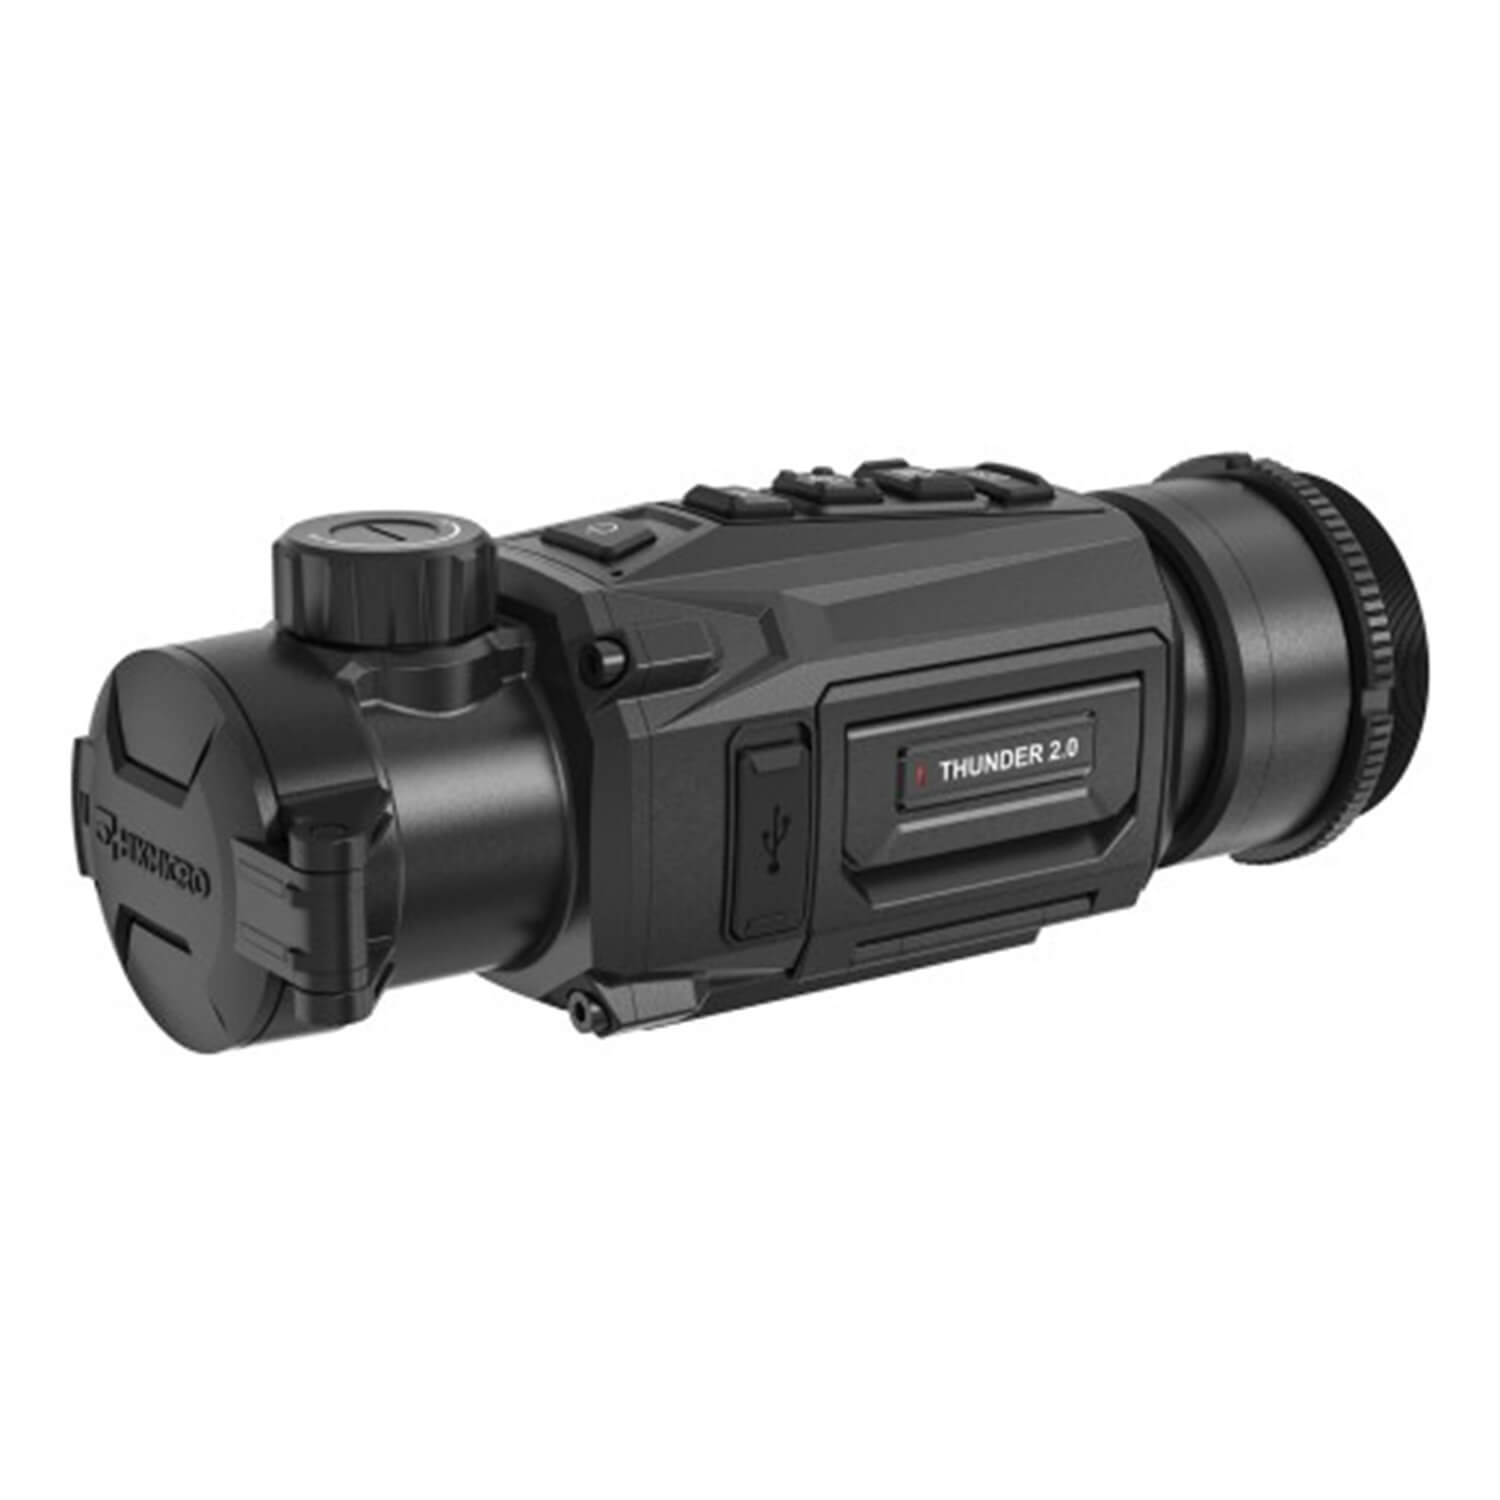 Hikmicro thermal imaging scope Thunder 2.0 TQ35C - Night Vision Devices